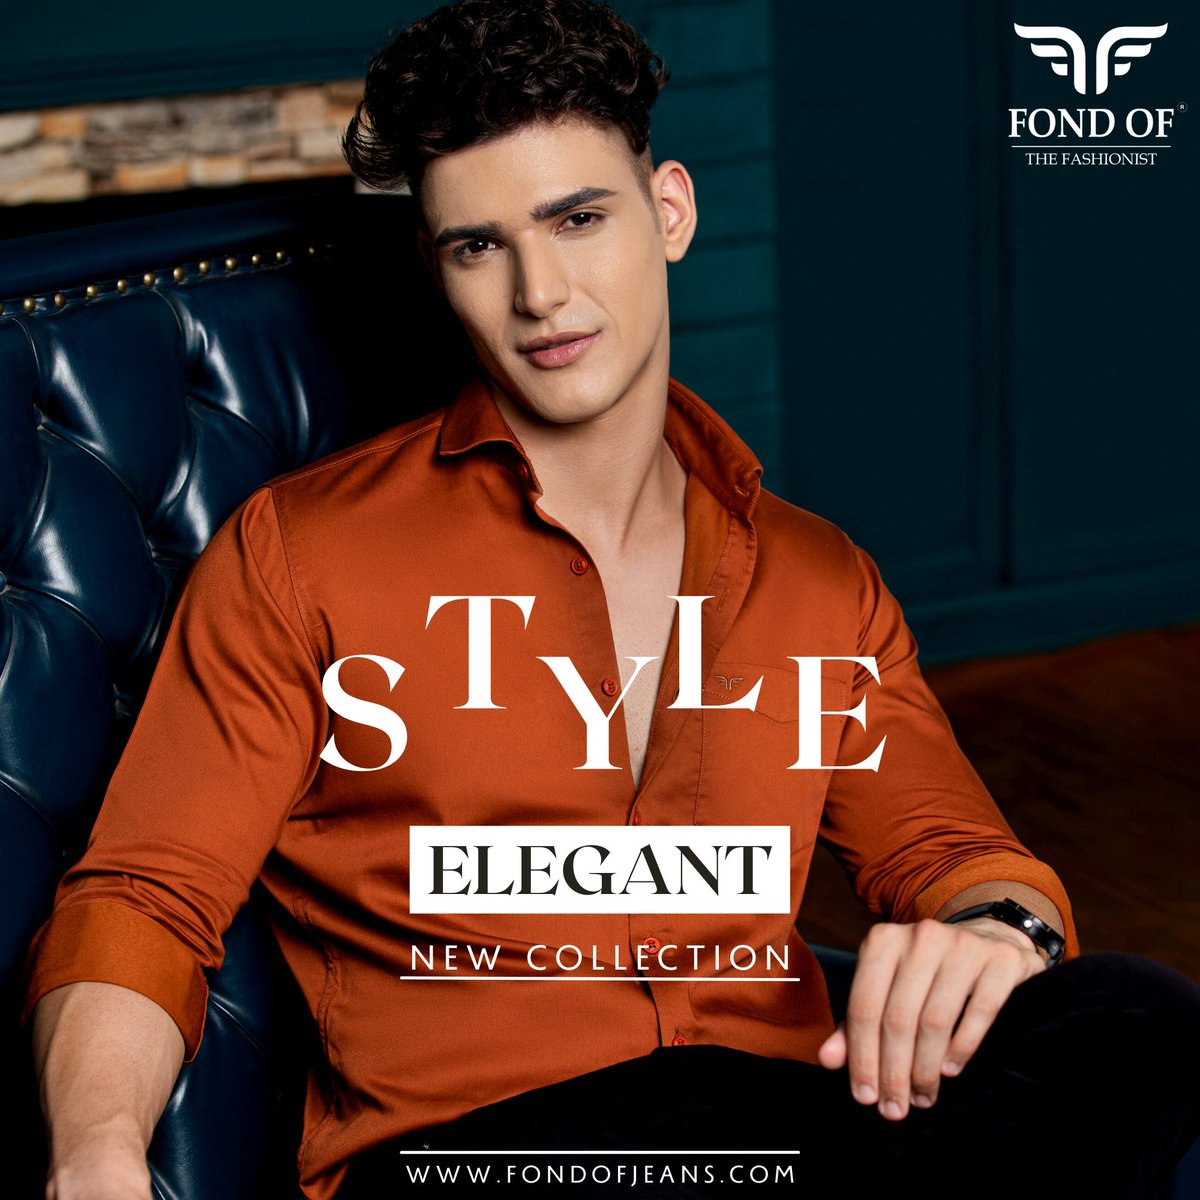 Wear shirts that give you a sense of elegance and style. So don't wait Grab @fondofjeans new collections now. . #mensfashion #menswear #mensstyle #mensdesignerwear #menswithclassandstyle #shirts #buyonline #buy #buyshirtsonline #malefashion #mensfashion #menslook #fashionformen